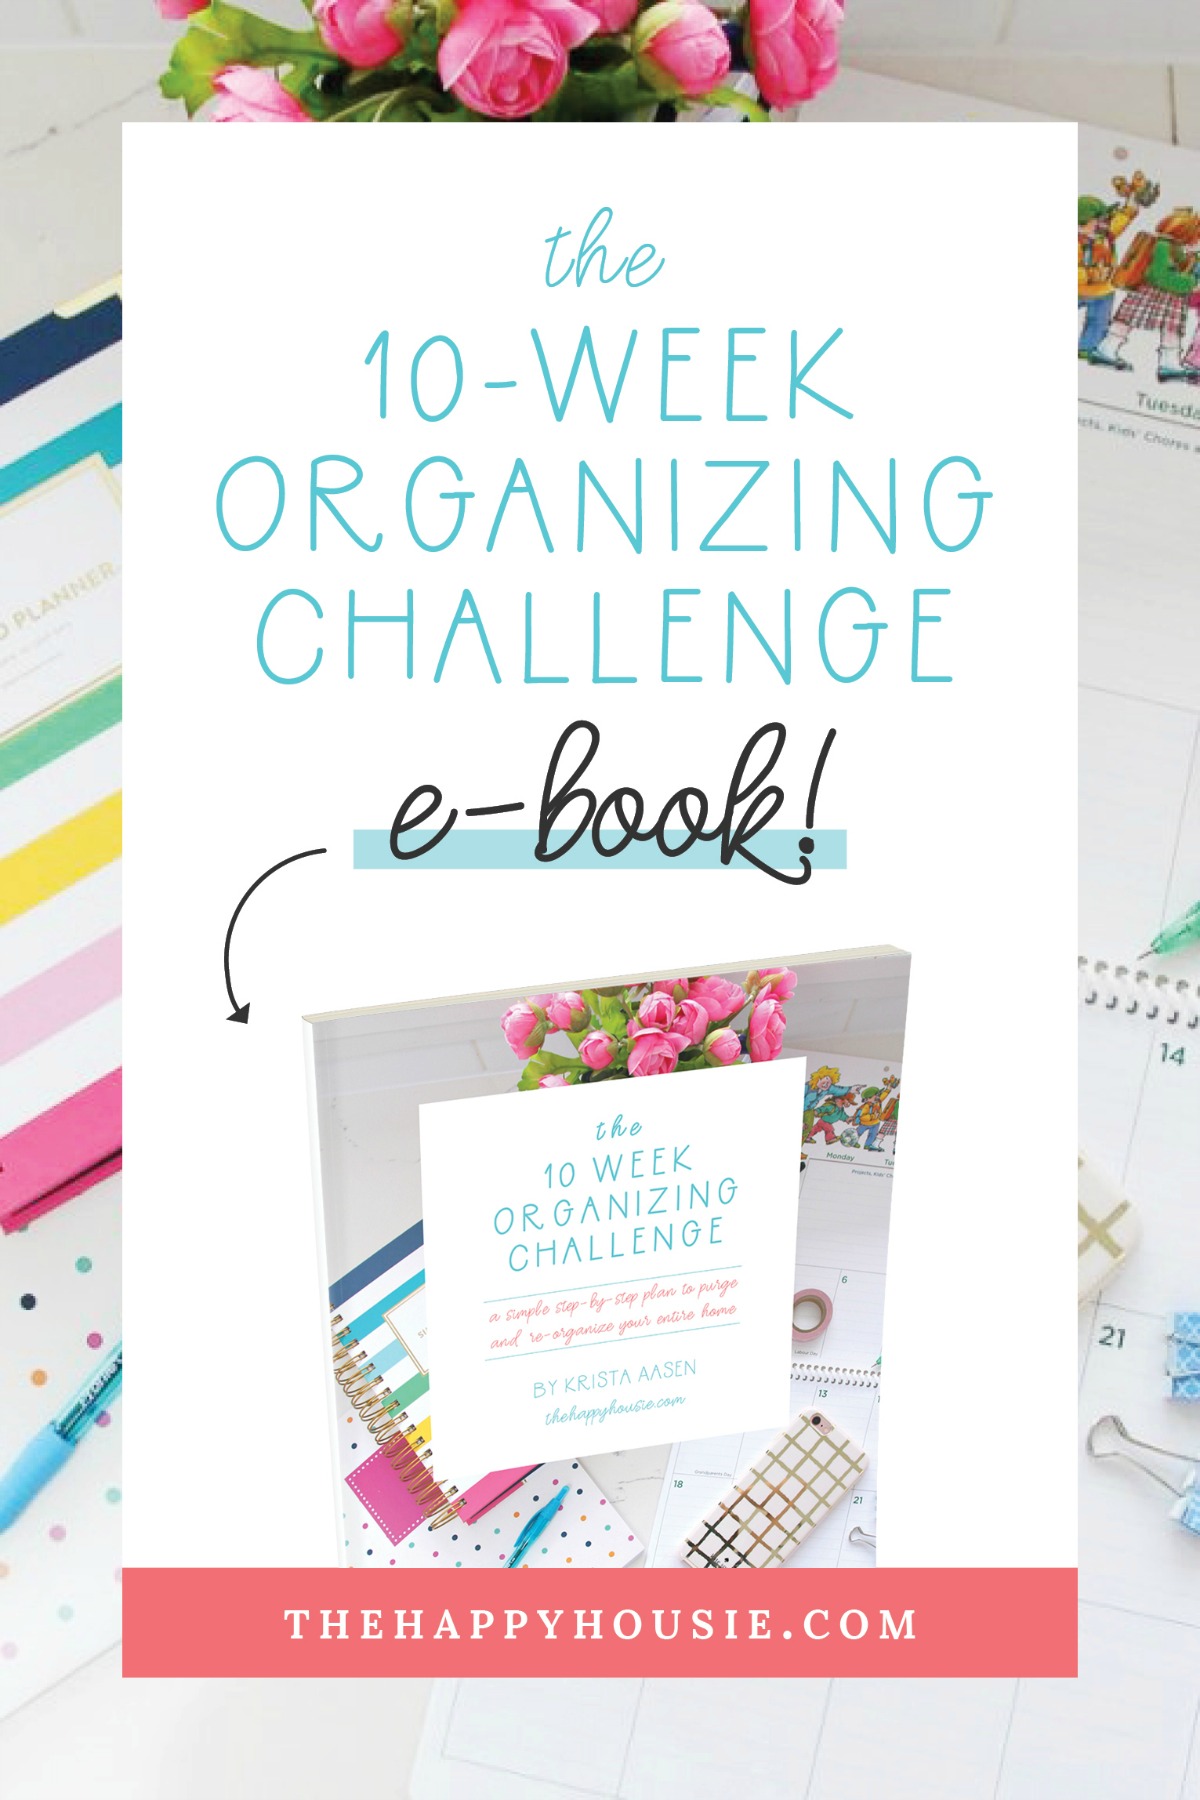 The 10 Week Organizing Challenge e-book poster.